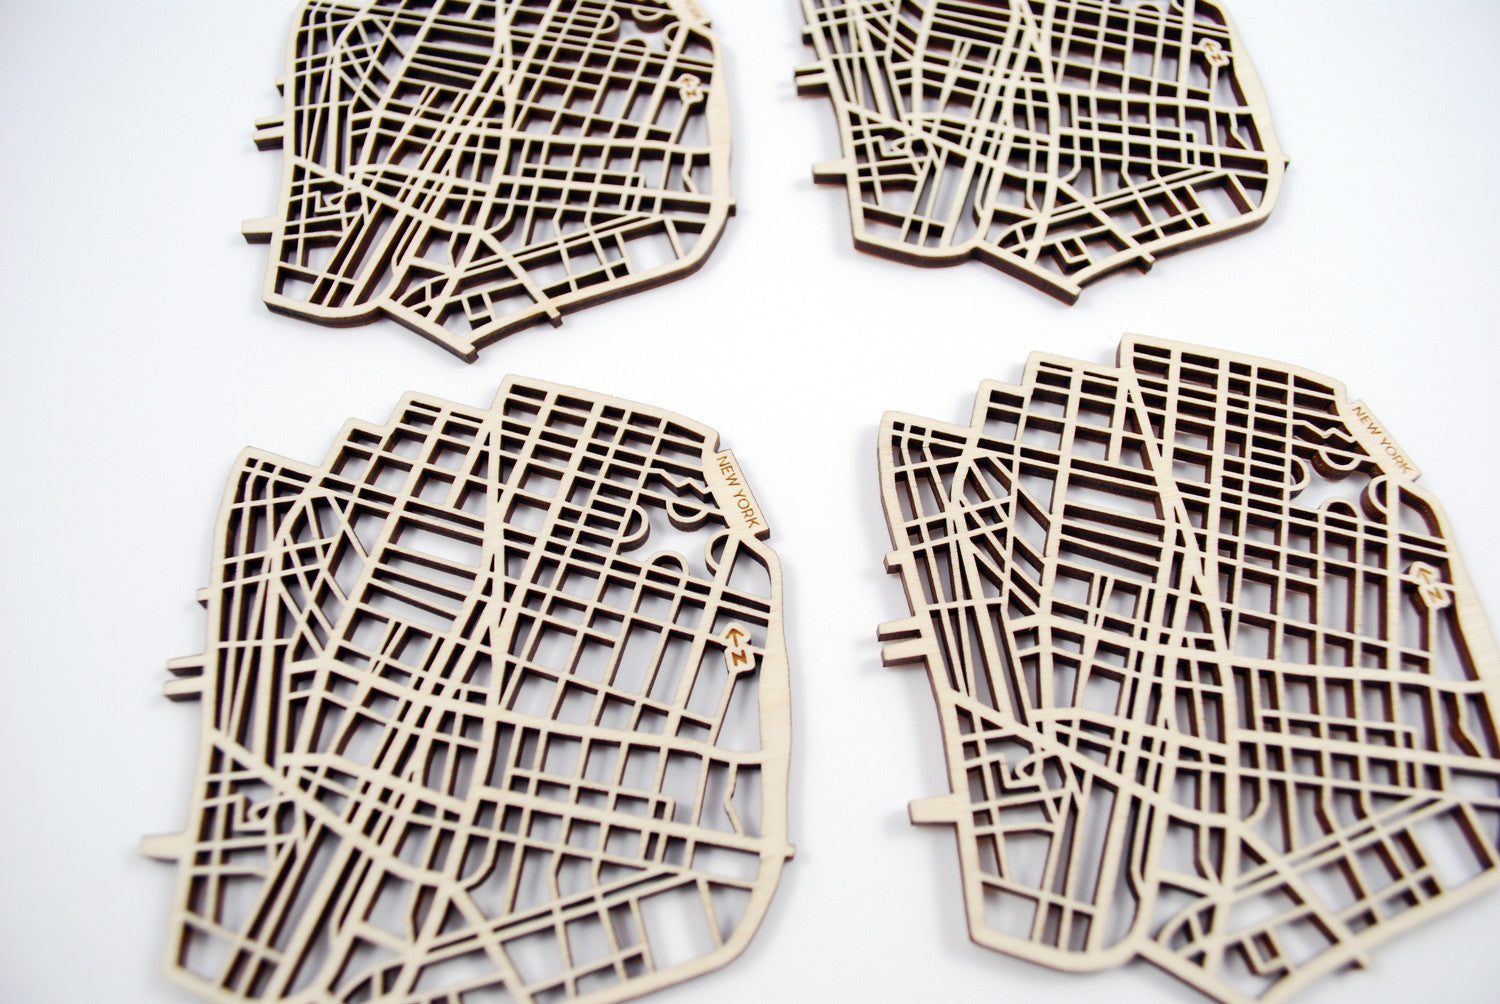 New York Map Coasters (set of 4)